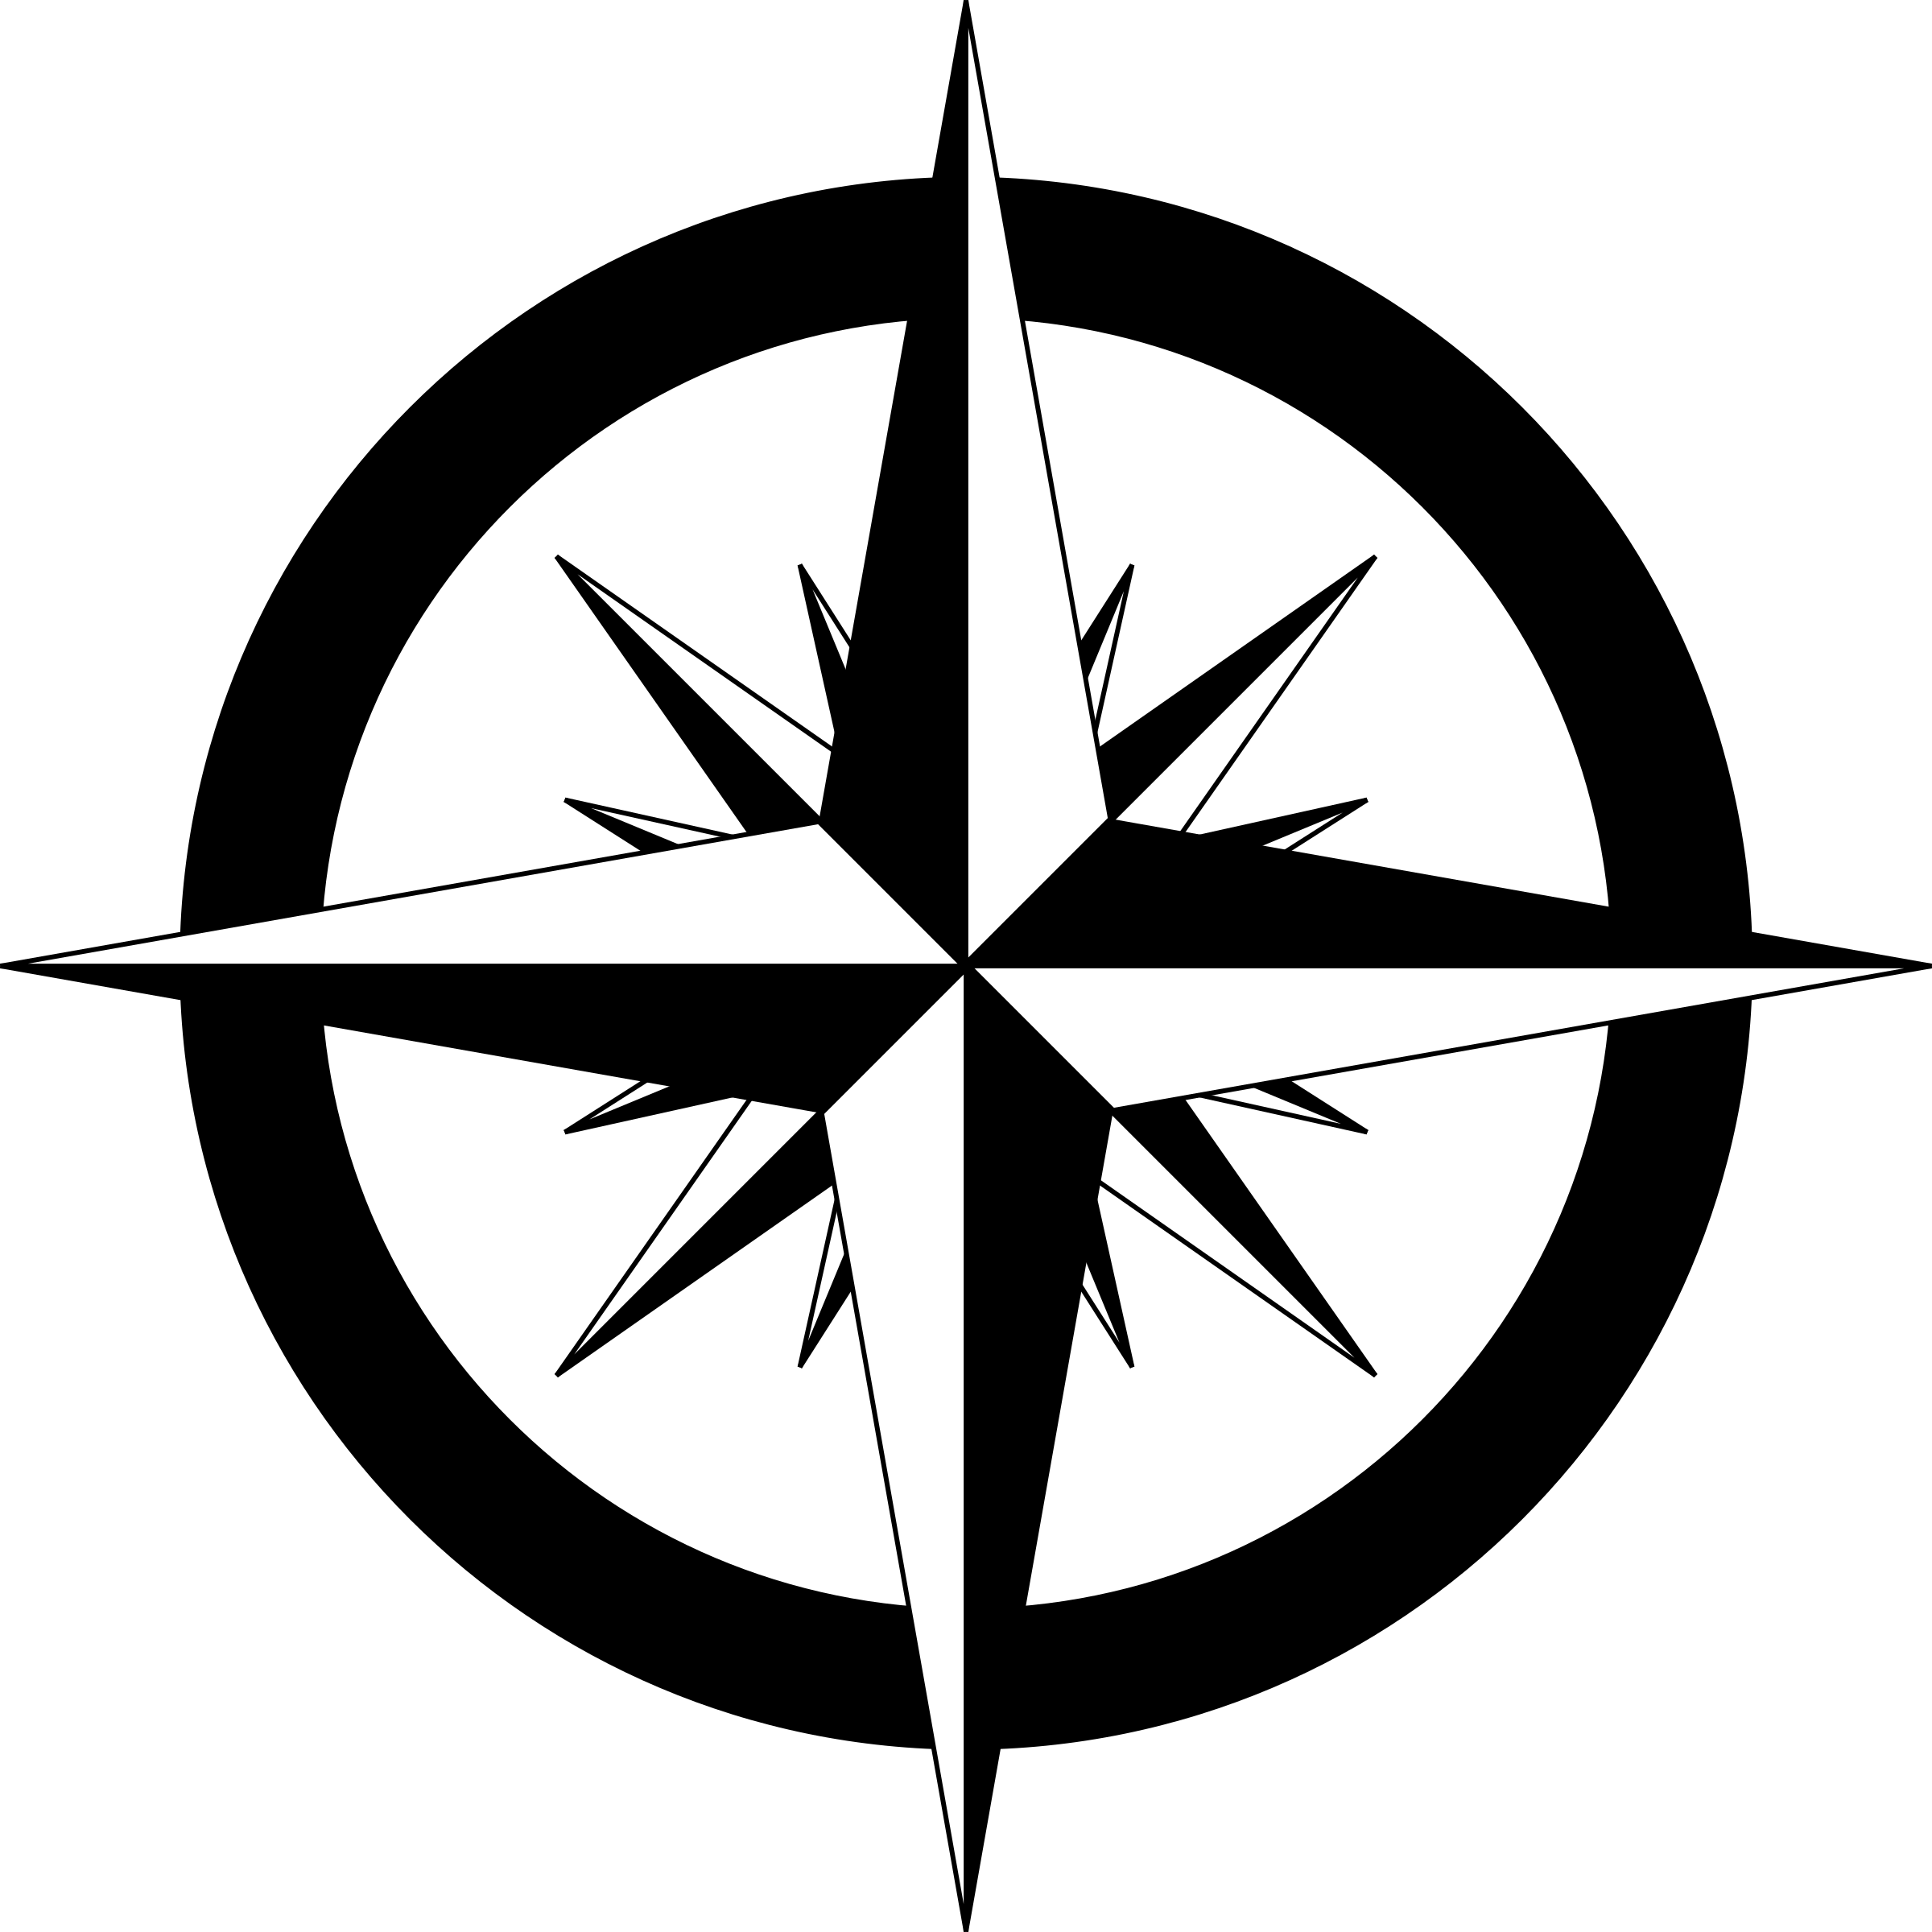 Compass Rose Vector Clipart image - Free stock photo - Public Domain